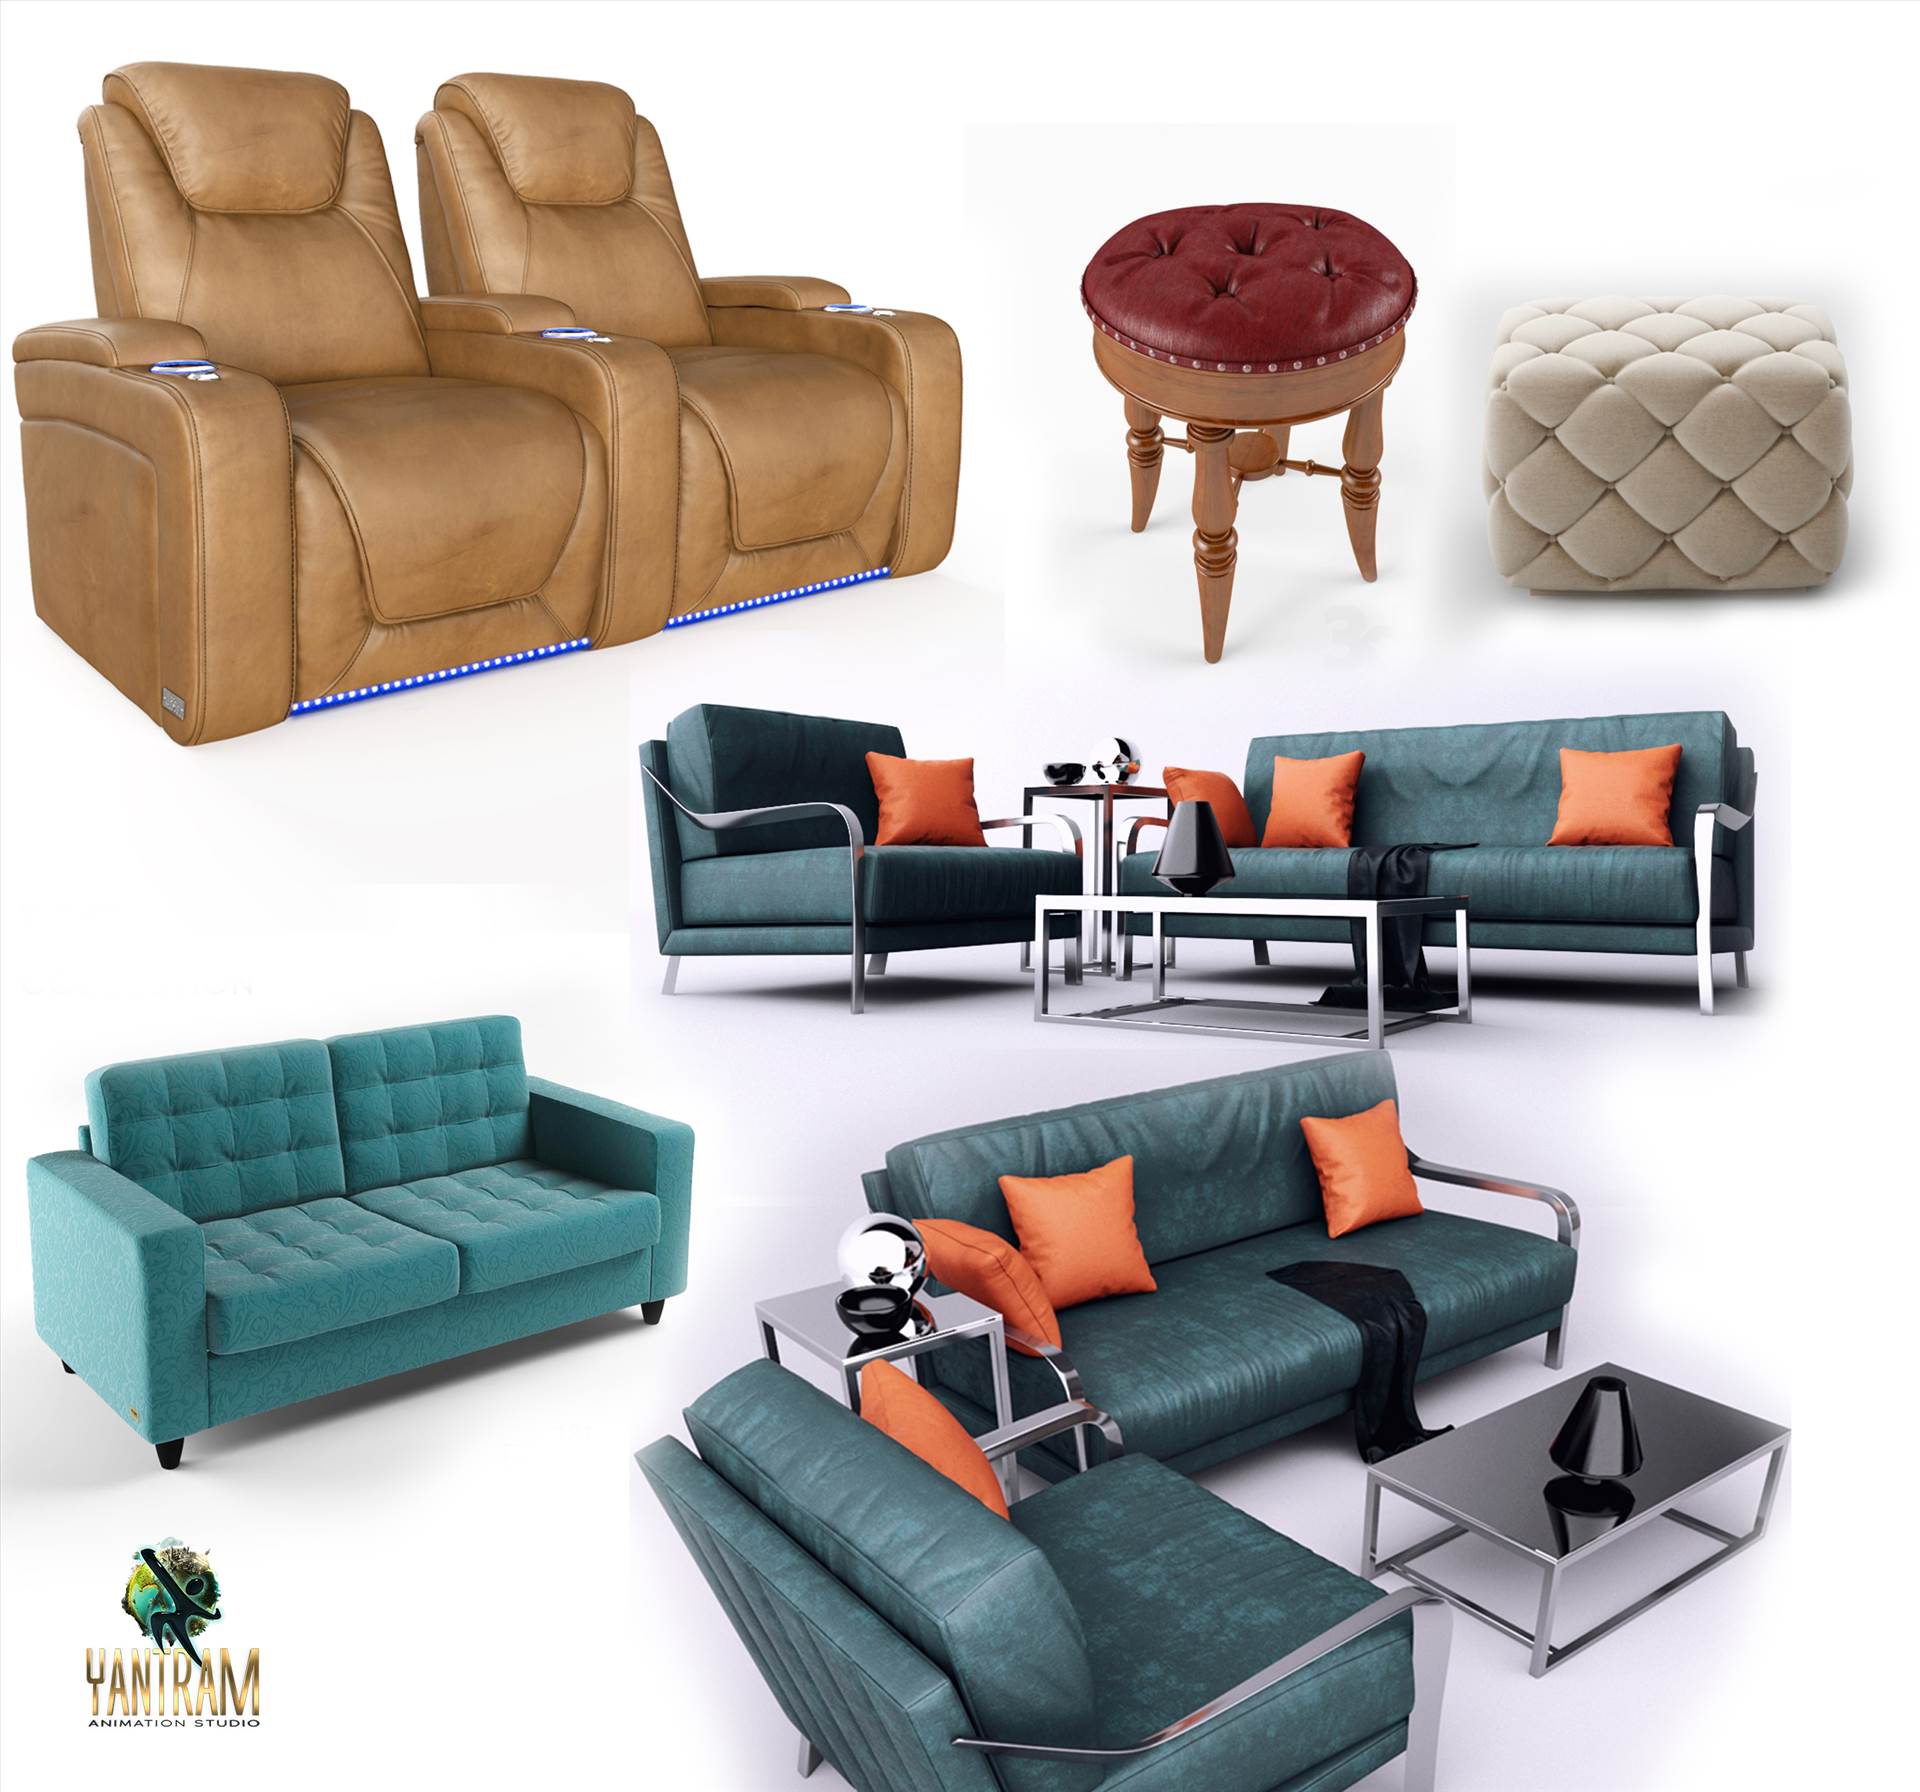 Realistic furniture 3d Product Modeling company \x26 3d Product visualization services - Denton, Texas.jpg -  by Yantramarchitecturaldesignstudio